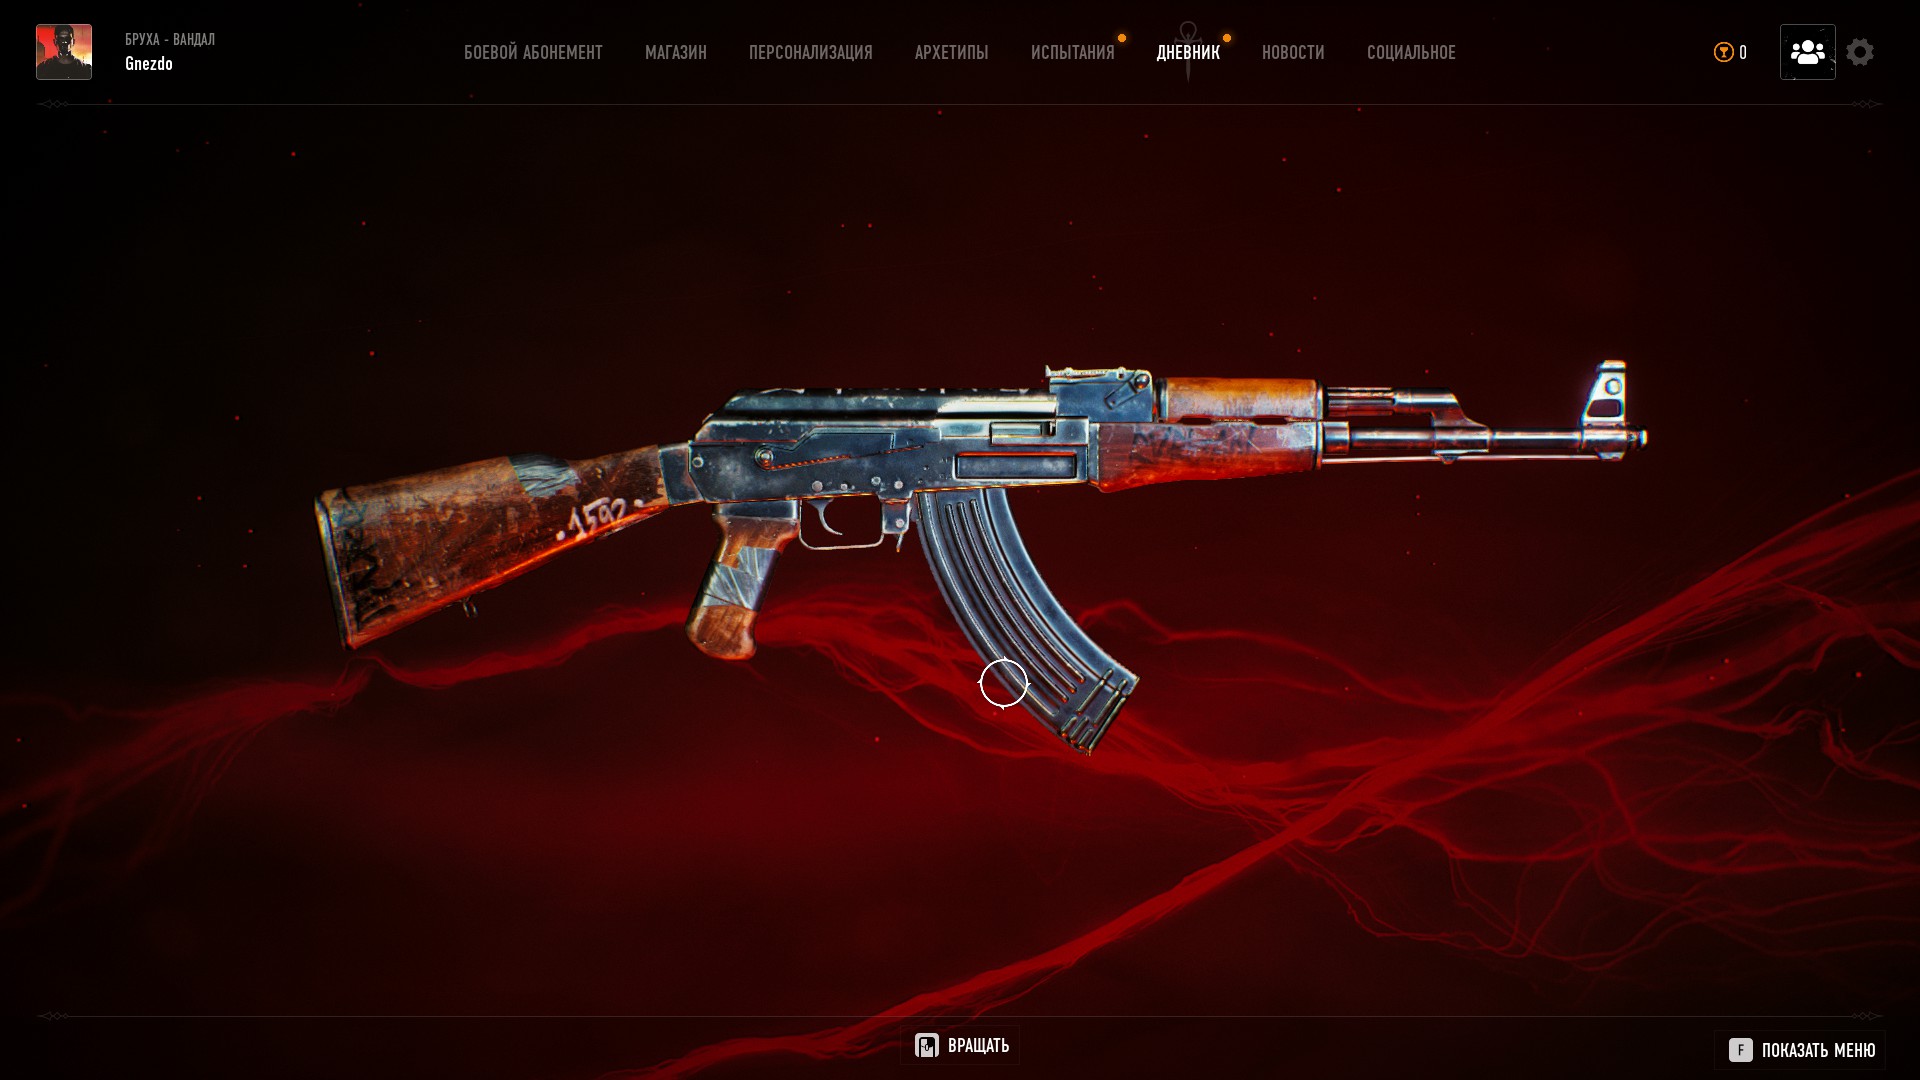 Bloodhunt All Weapon + Damage Information - Assault rifle - 34BEECE